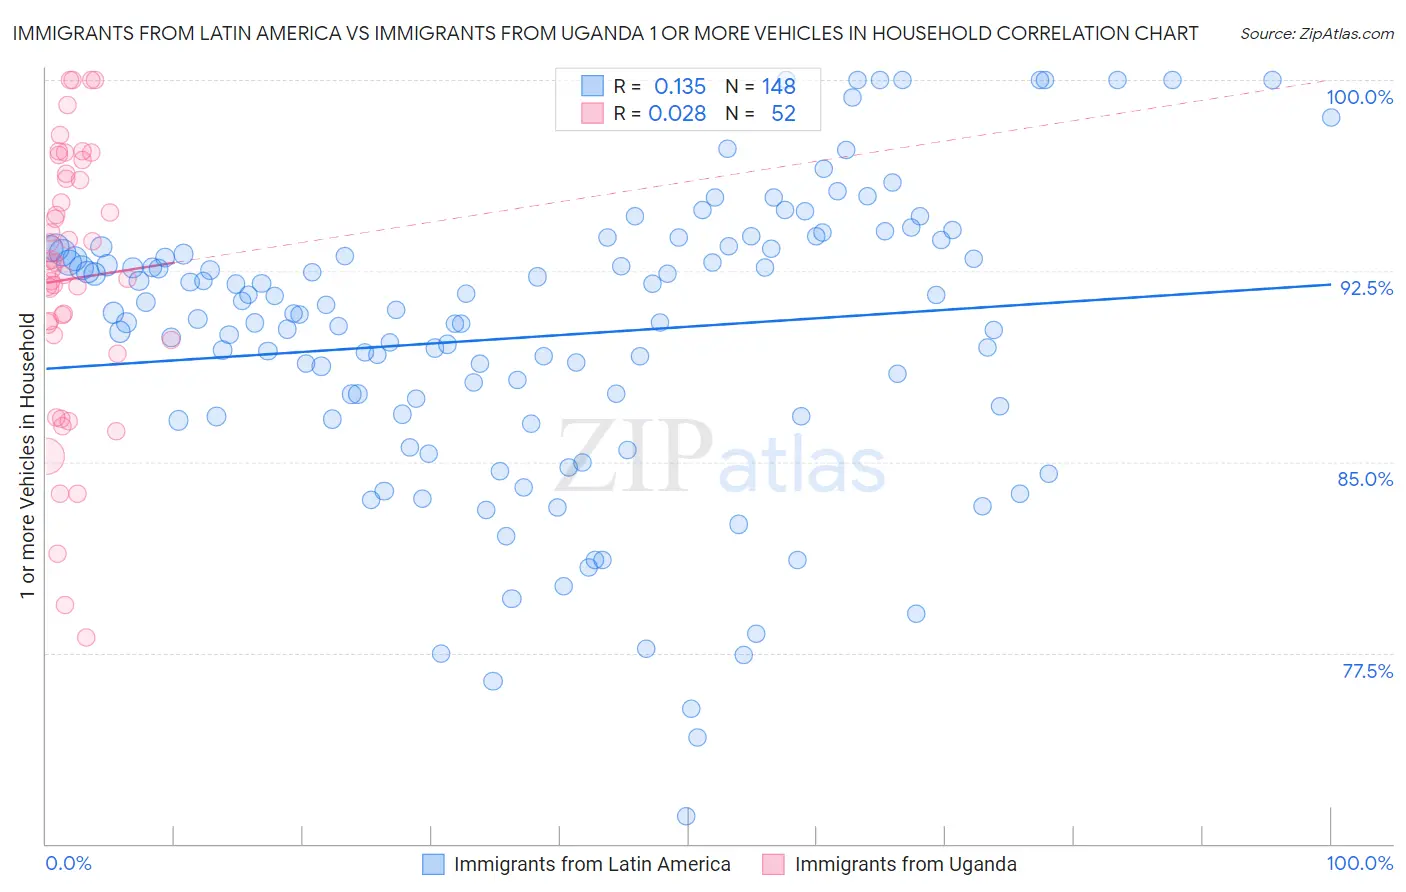 Immigrants from Latin America vs Immigrants from Uganda 1 or more Vehicles in Household